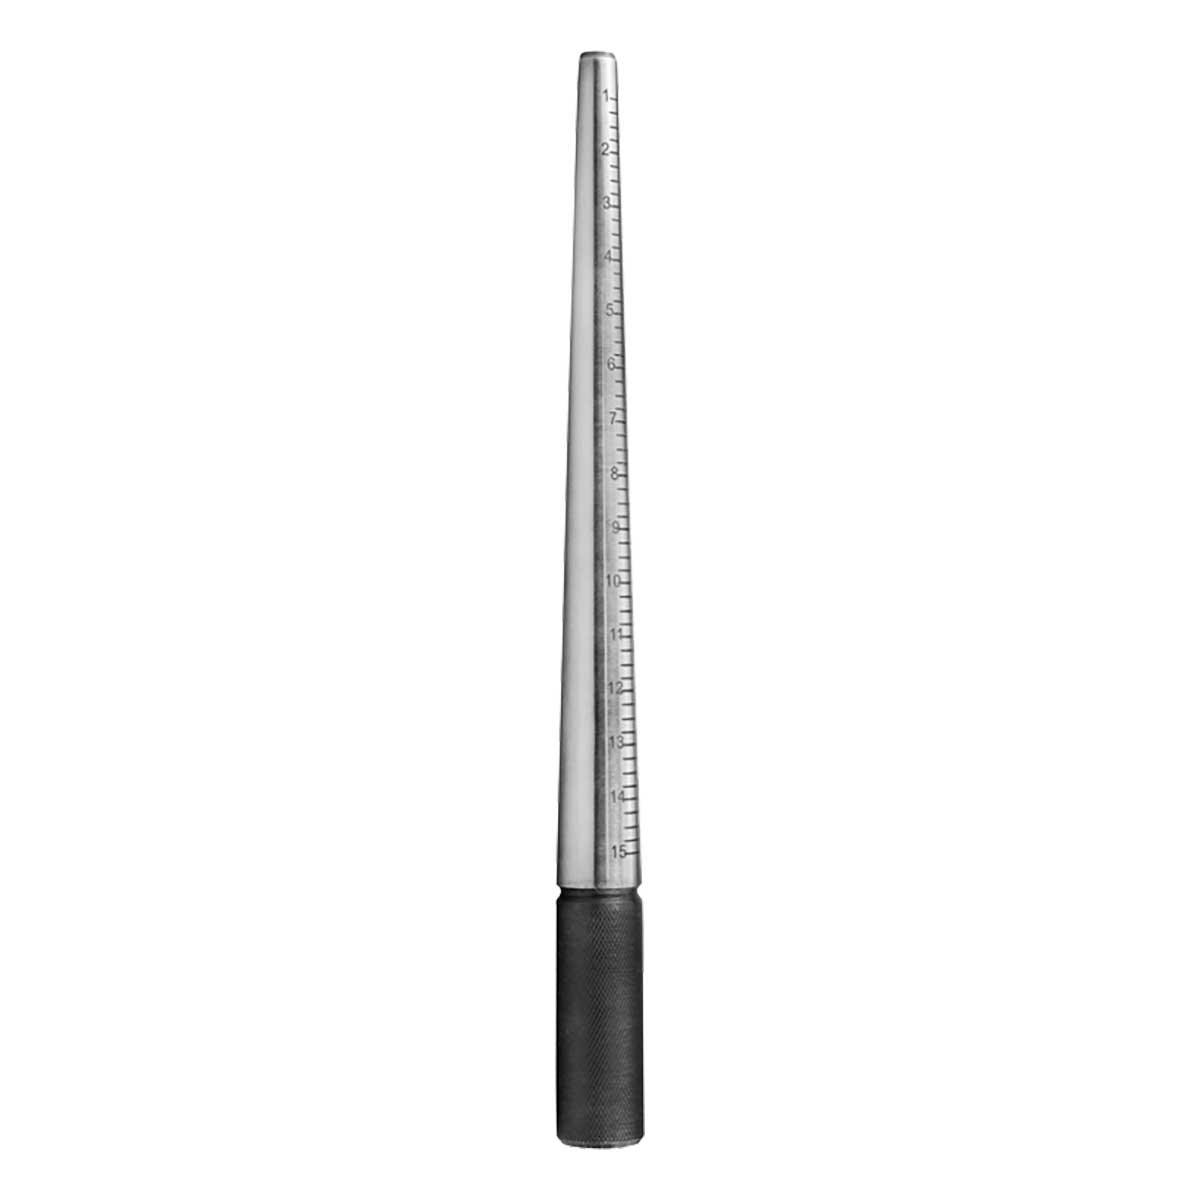 Ring Mandrel with Ring Sizes - Grooved - Solid Steel